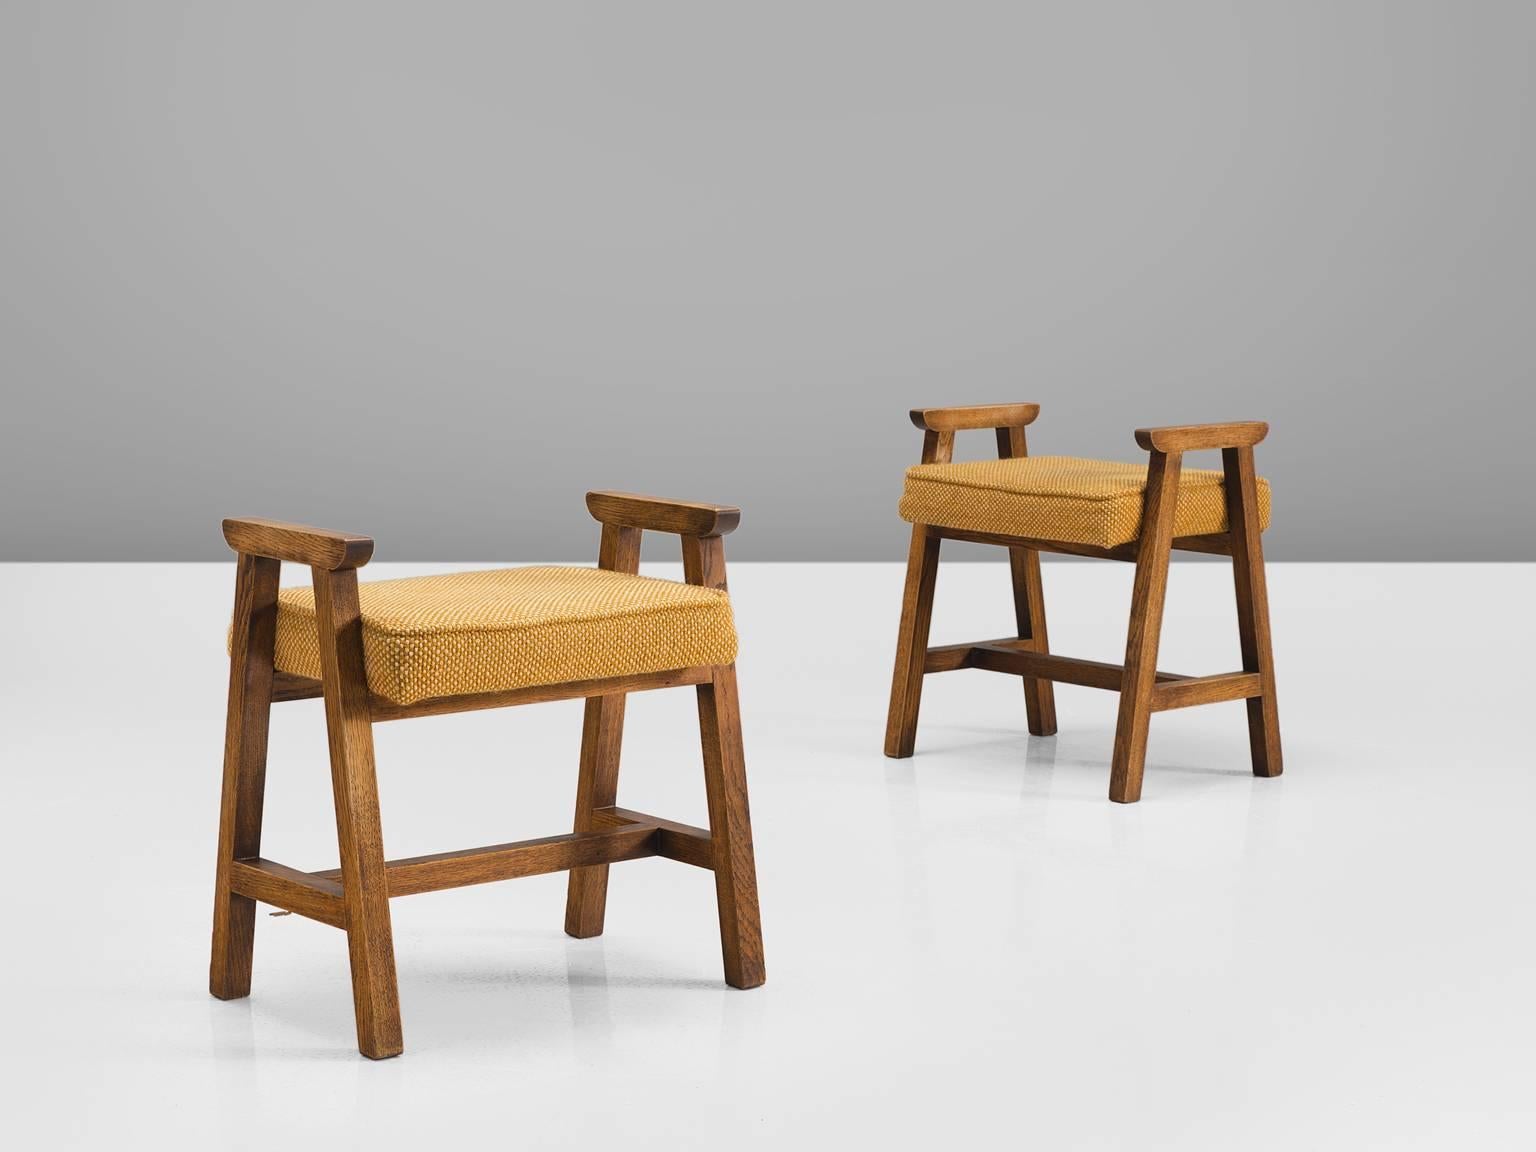 Guillerme et Chambron, set of two stools, oak and yellow fabric, France, 1960s. 

This duo of solid oak wooden stools with the muted yellow colors are designed by the French designer duo Guillerme and Chambron. These stools have a frame in oak